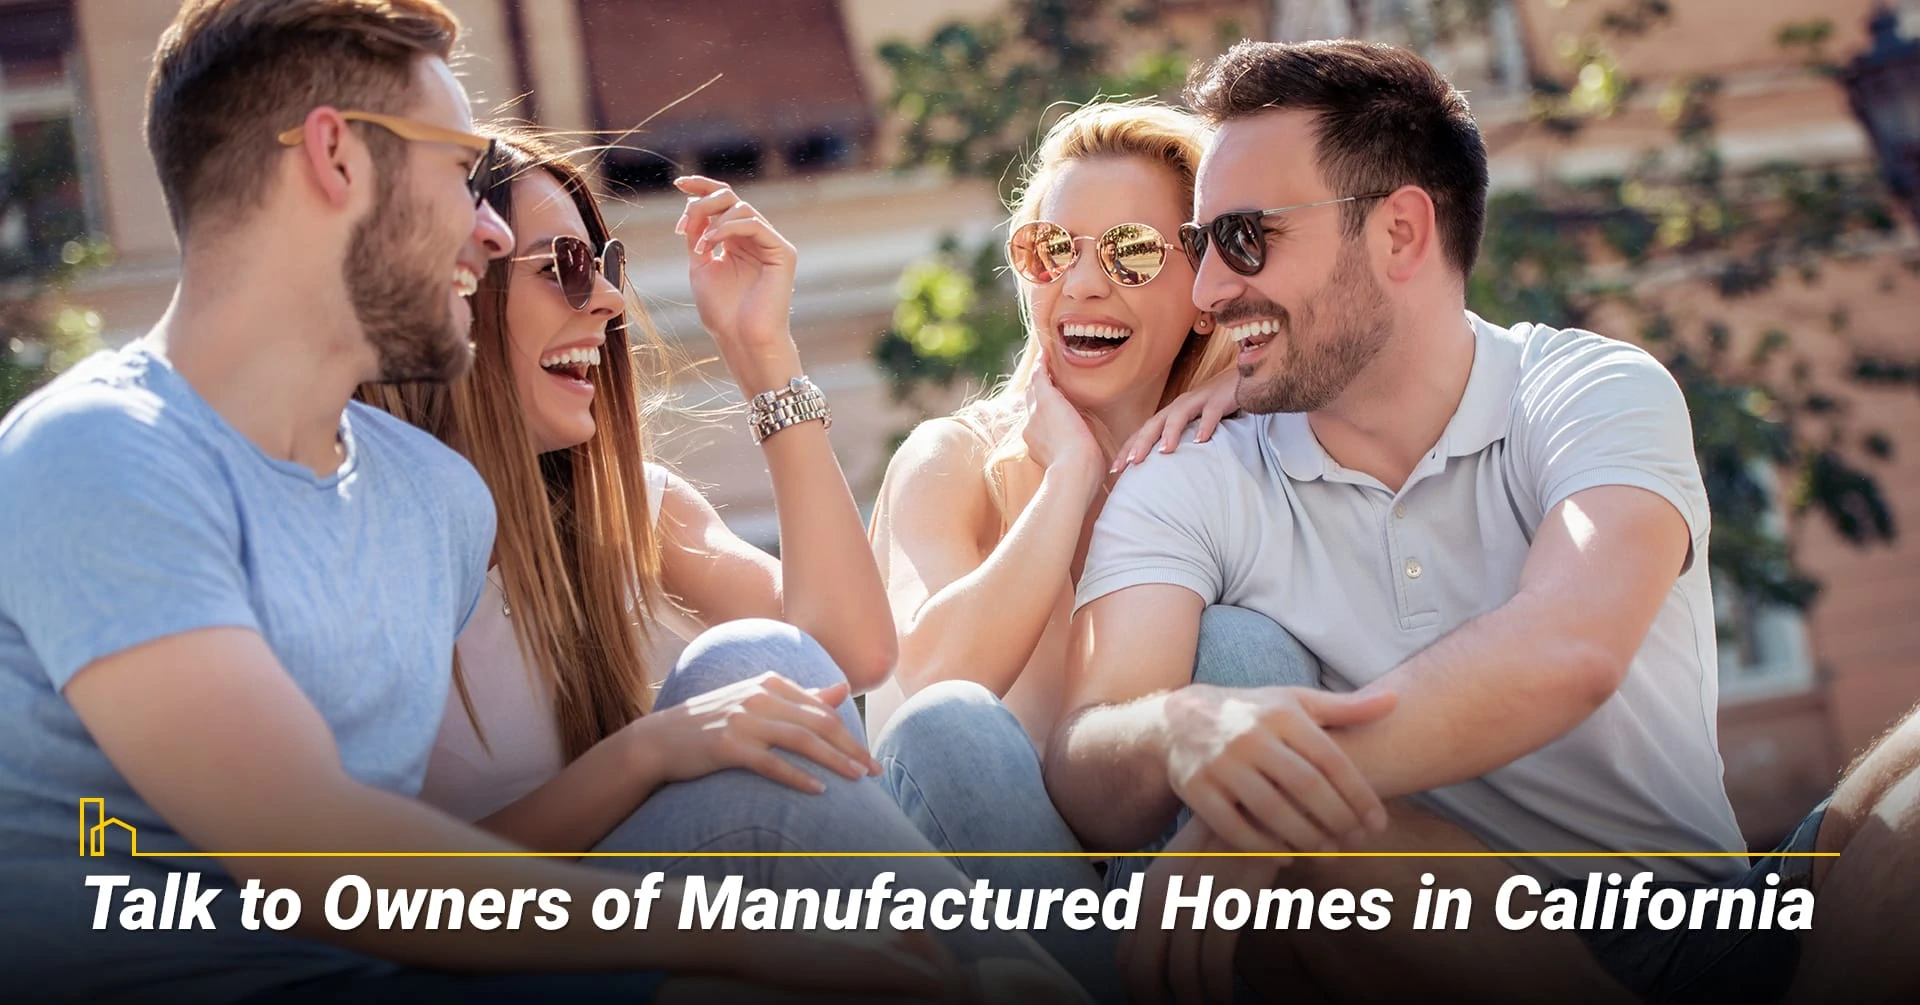 Talk to Owners of Manufactured Homes in California, gather information from current owners